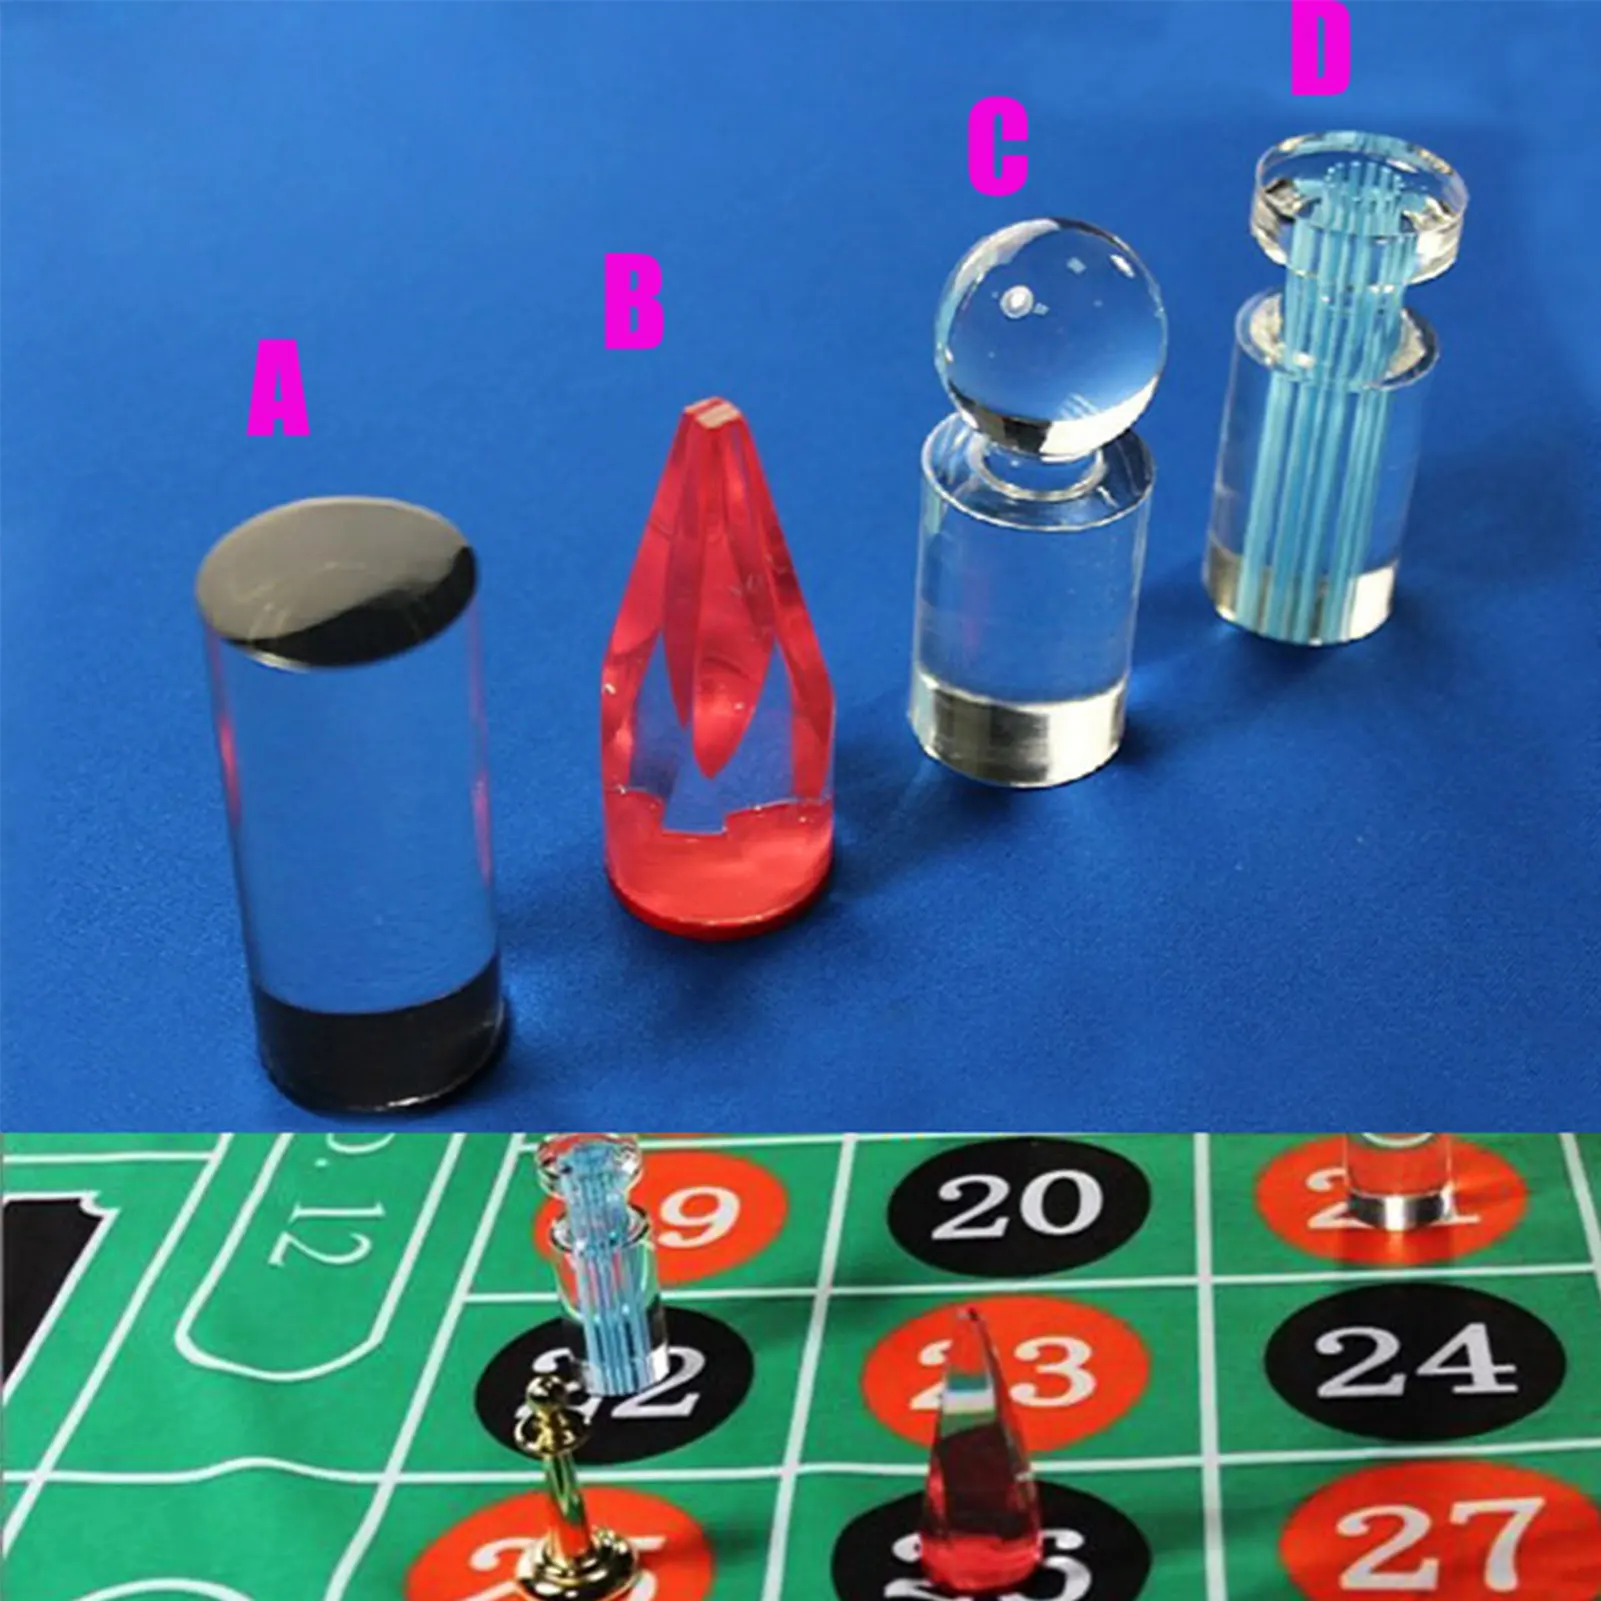 

Roulette Win Marker Acrylic Roulette Marker For Poker Games Board Game Toys For Party And Family